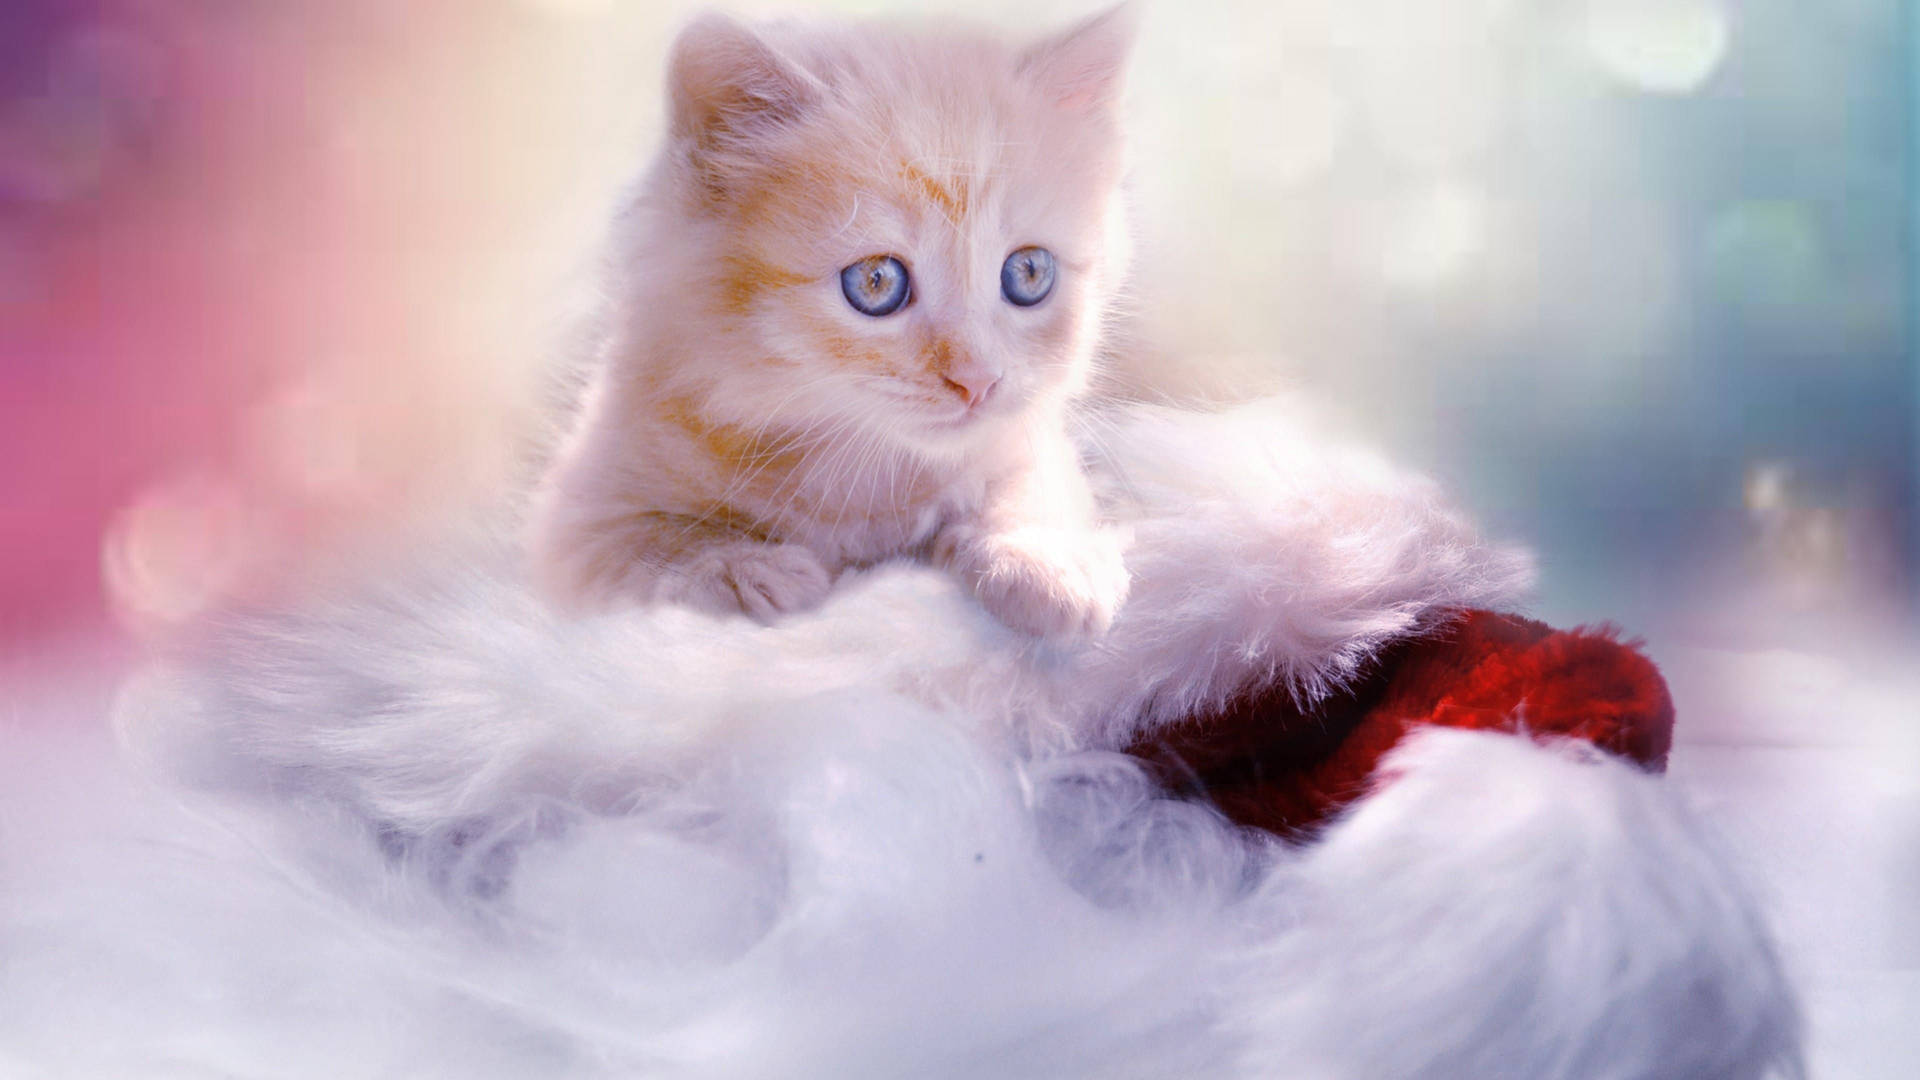 Free Cute Kittens Photos and Vectors